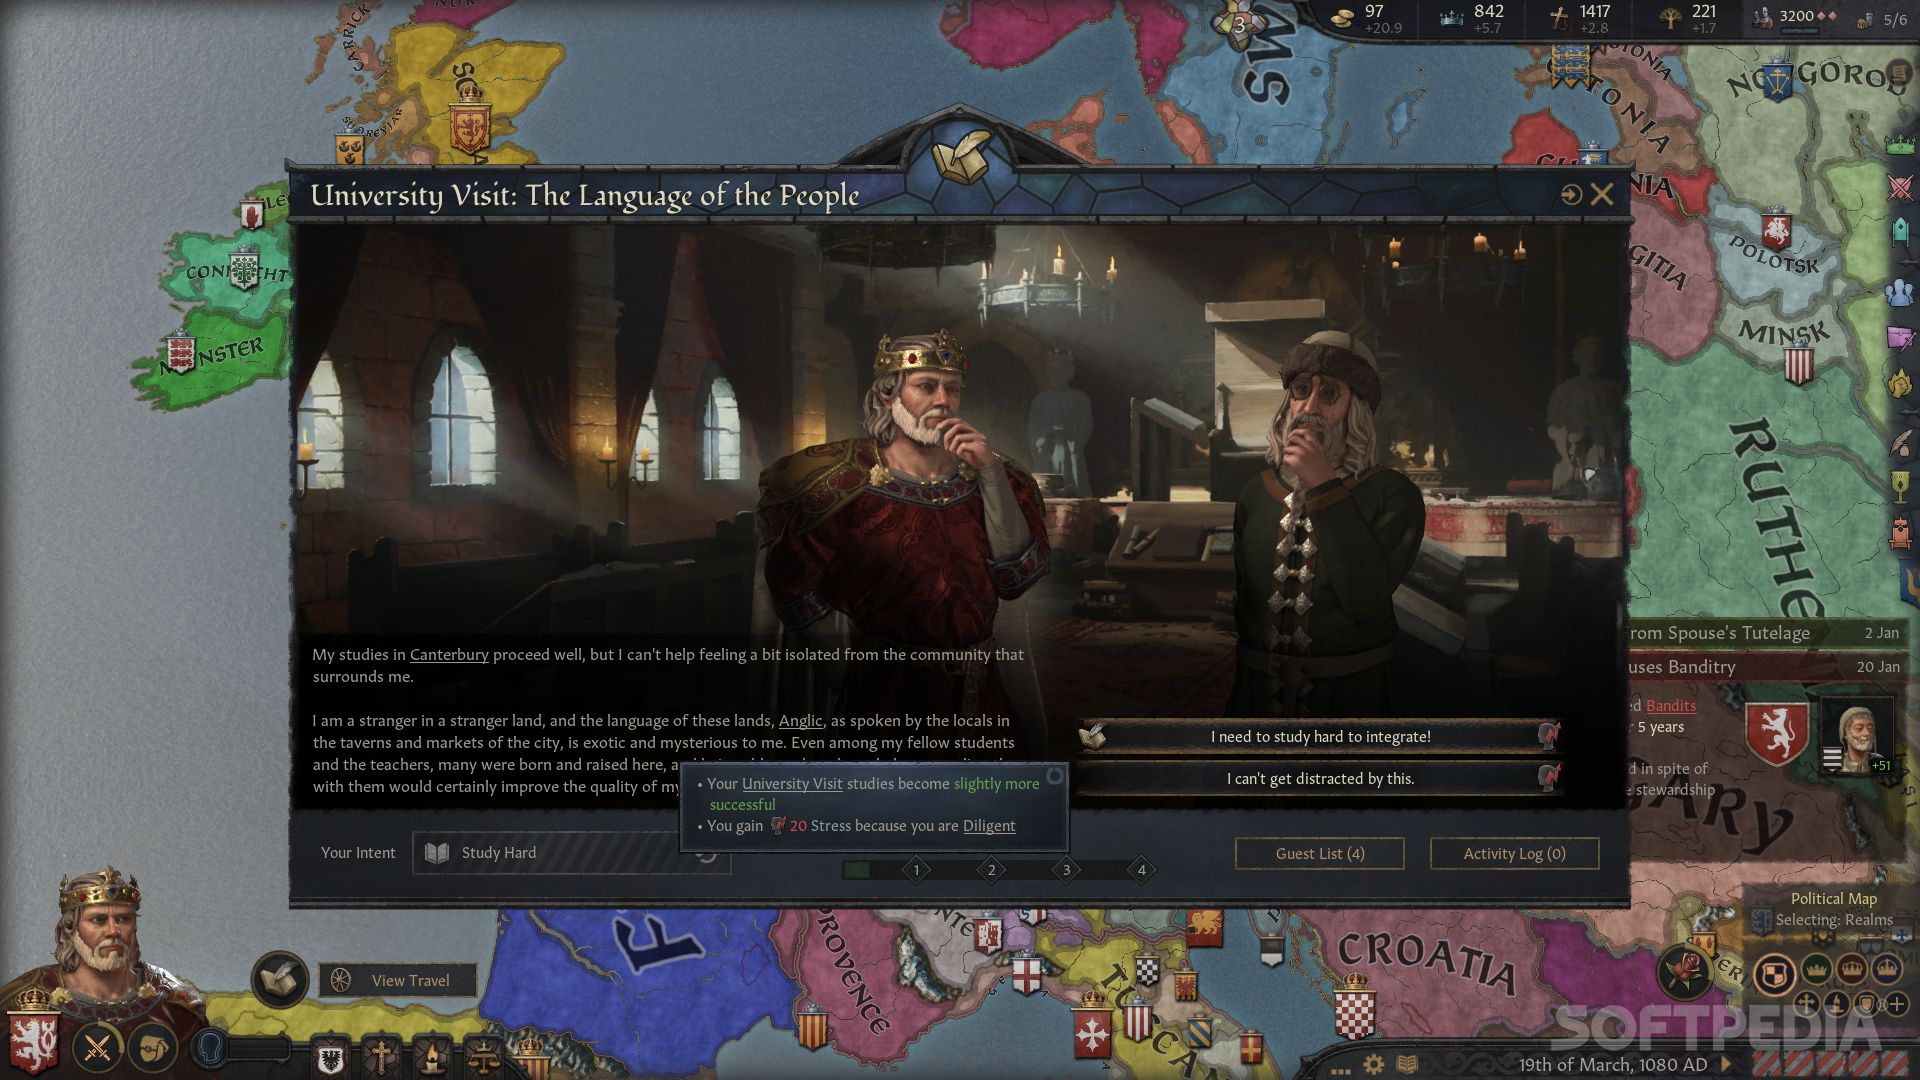 Let's Play Crusader Kings 3 – The Lords of Penfro – The Shieldmaiden 